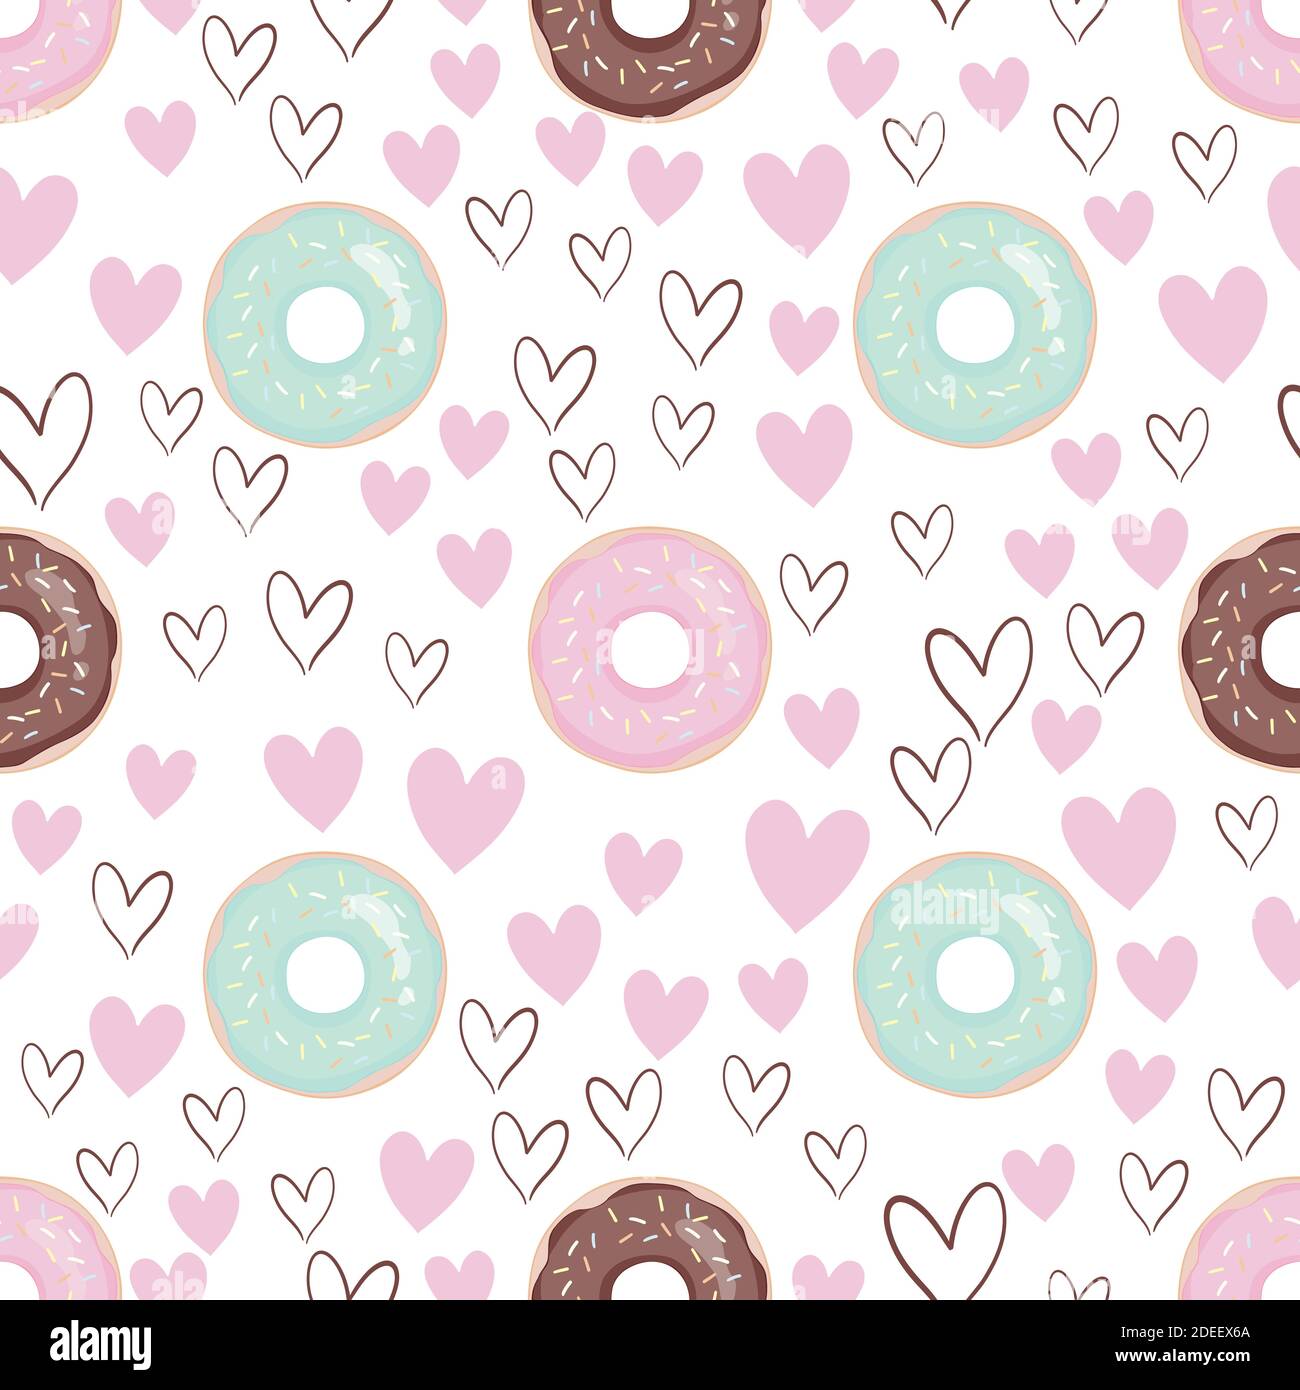 Vector Seamless Pattern With Colorful Donuts With Glaze And Sprinkles On A White Background 0087